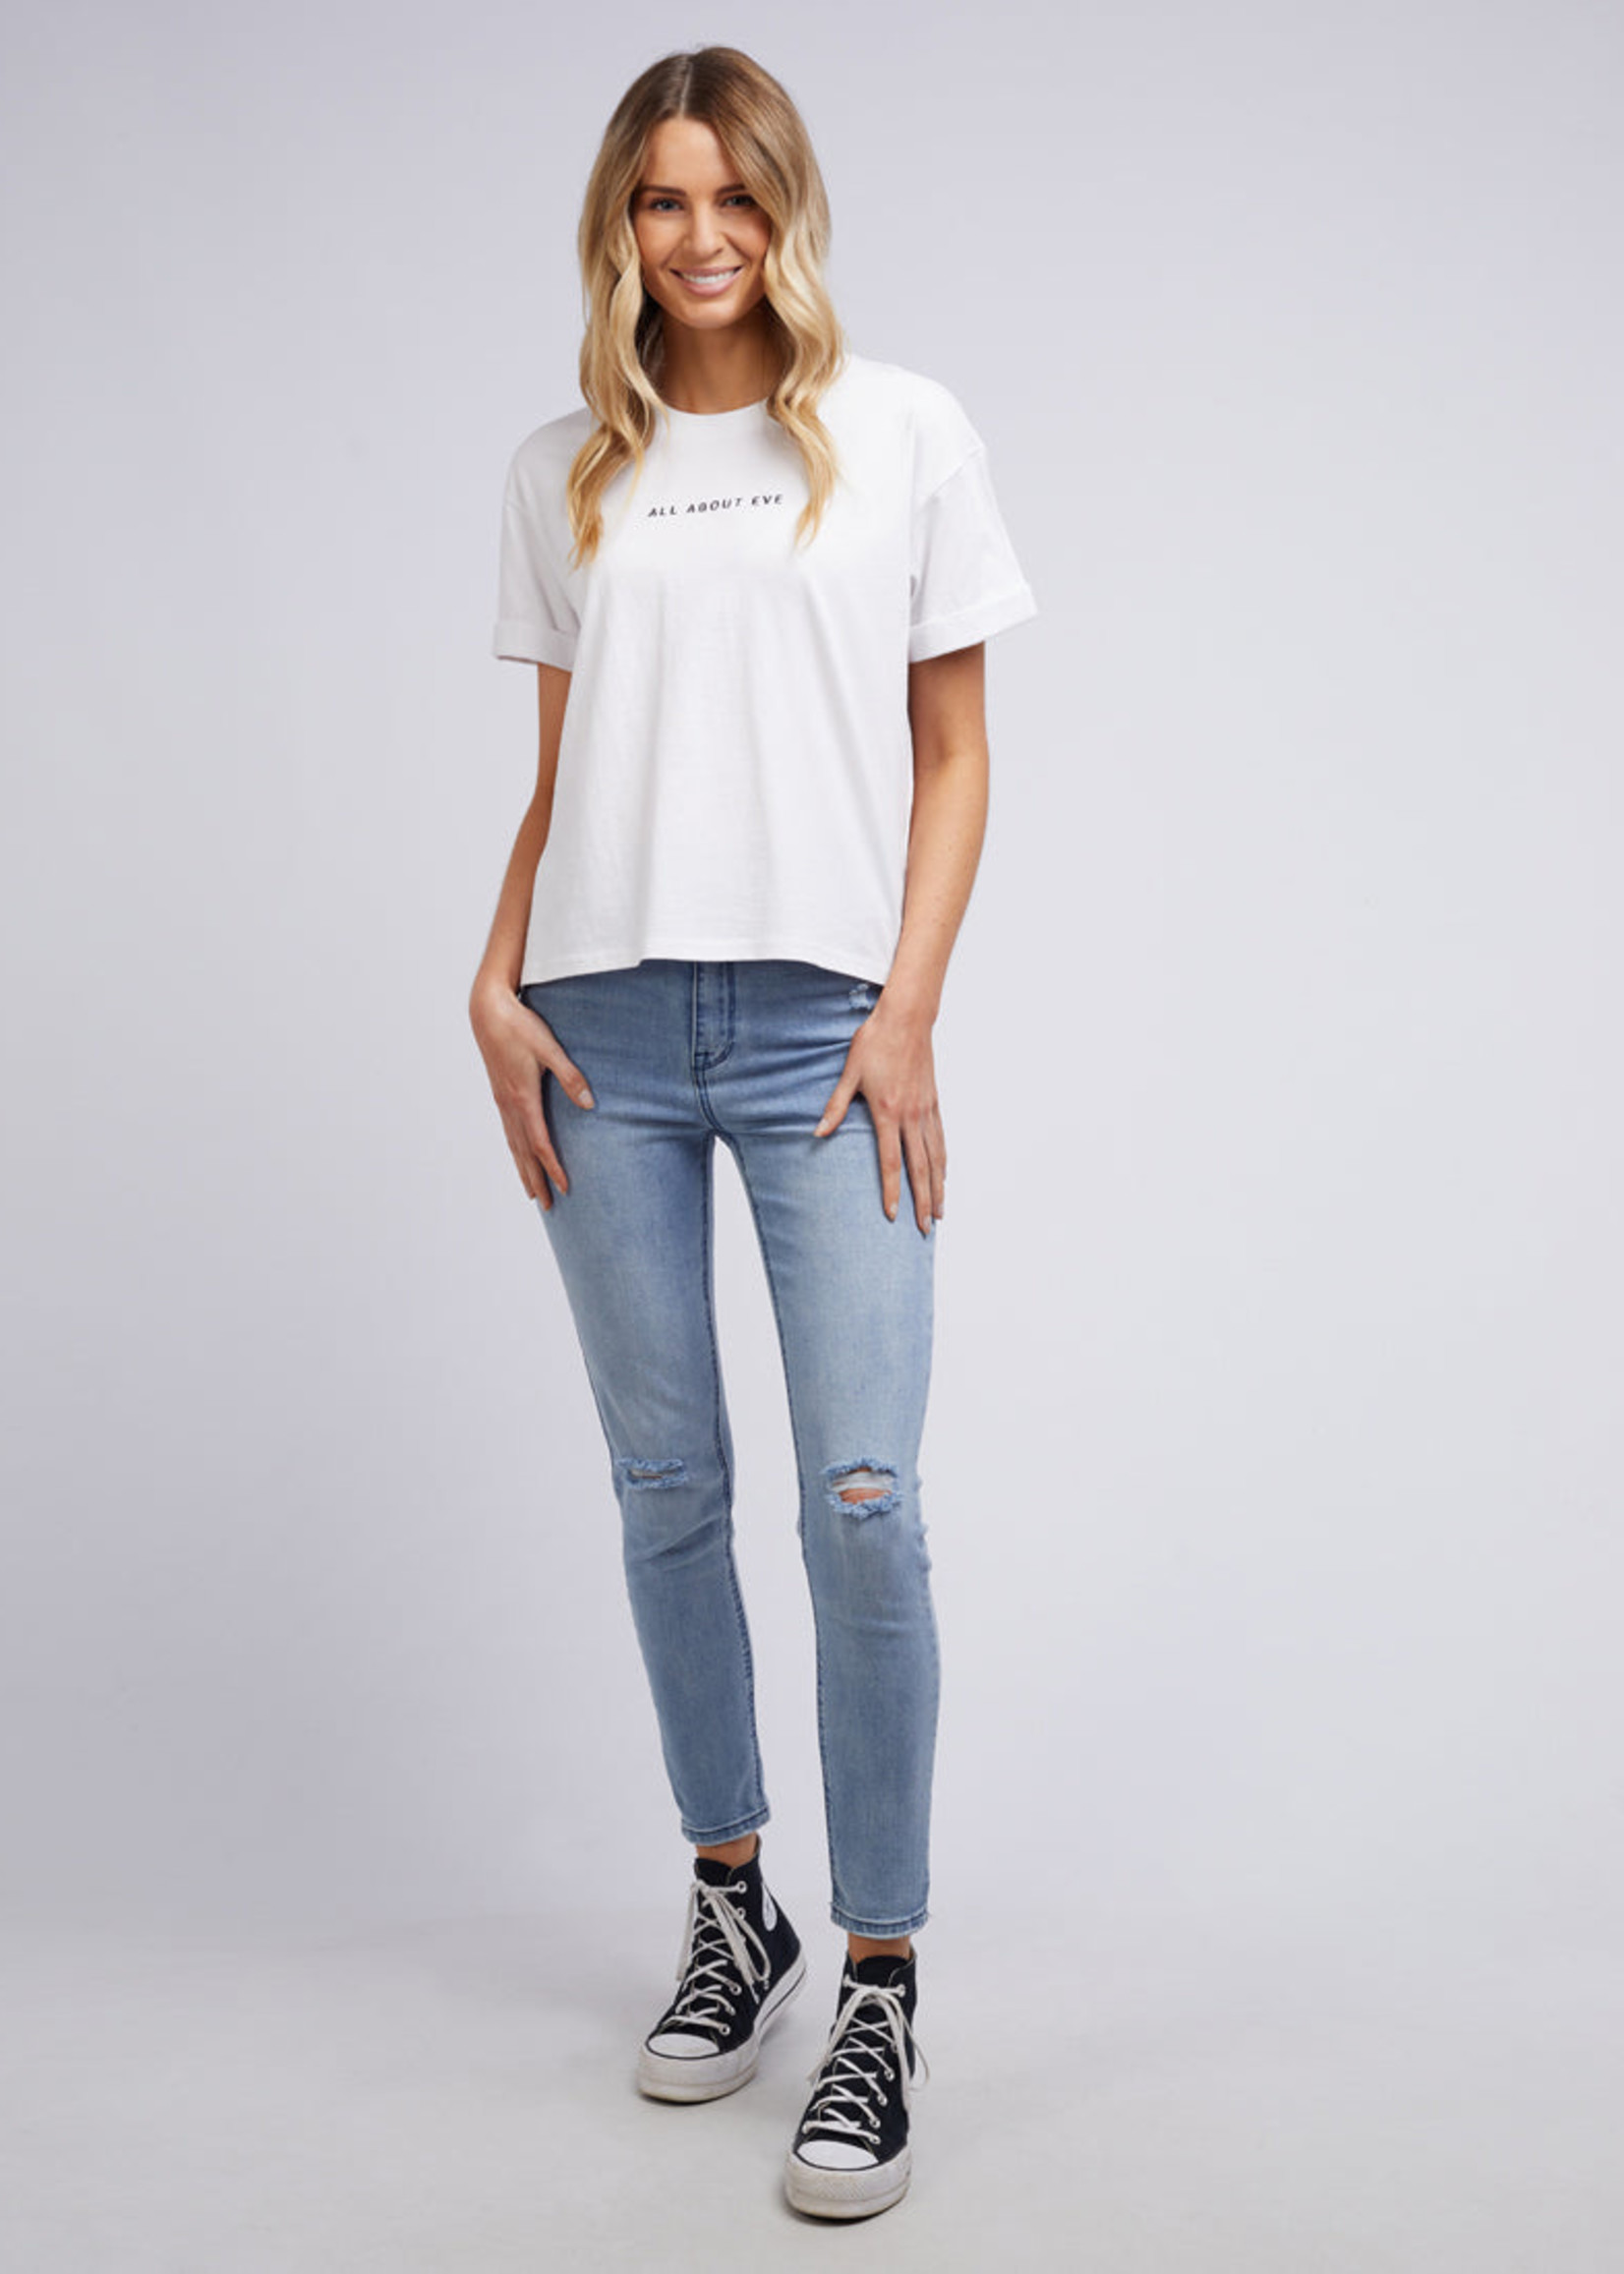 All About Eve AAE Washed Tee (White)